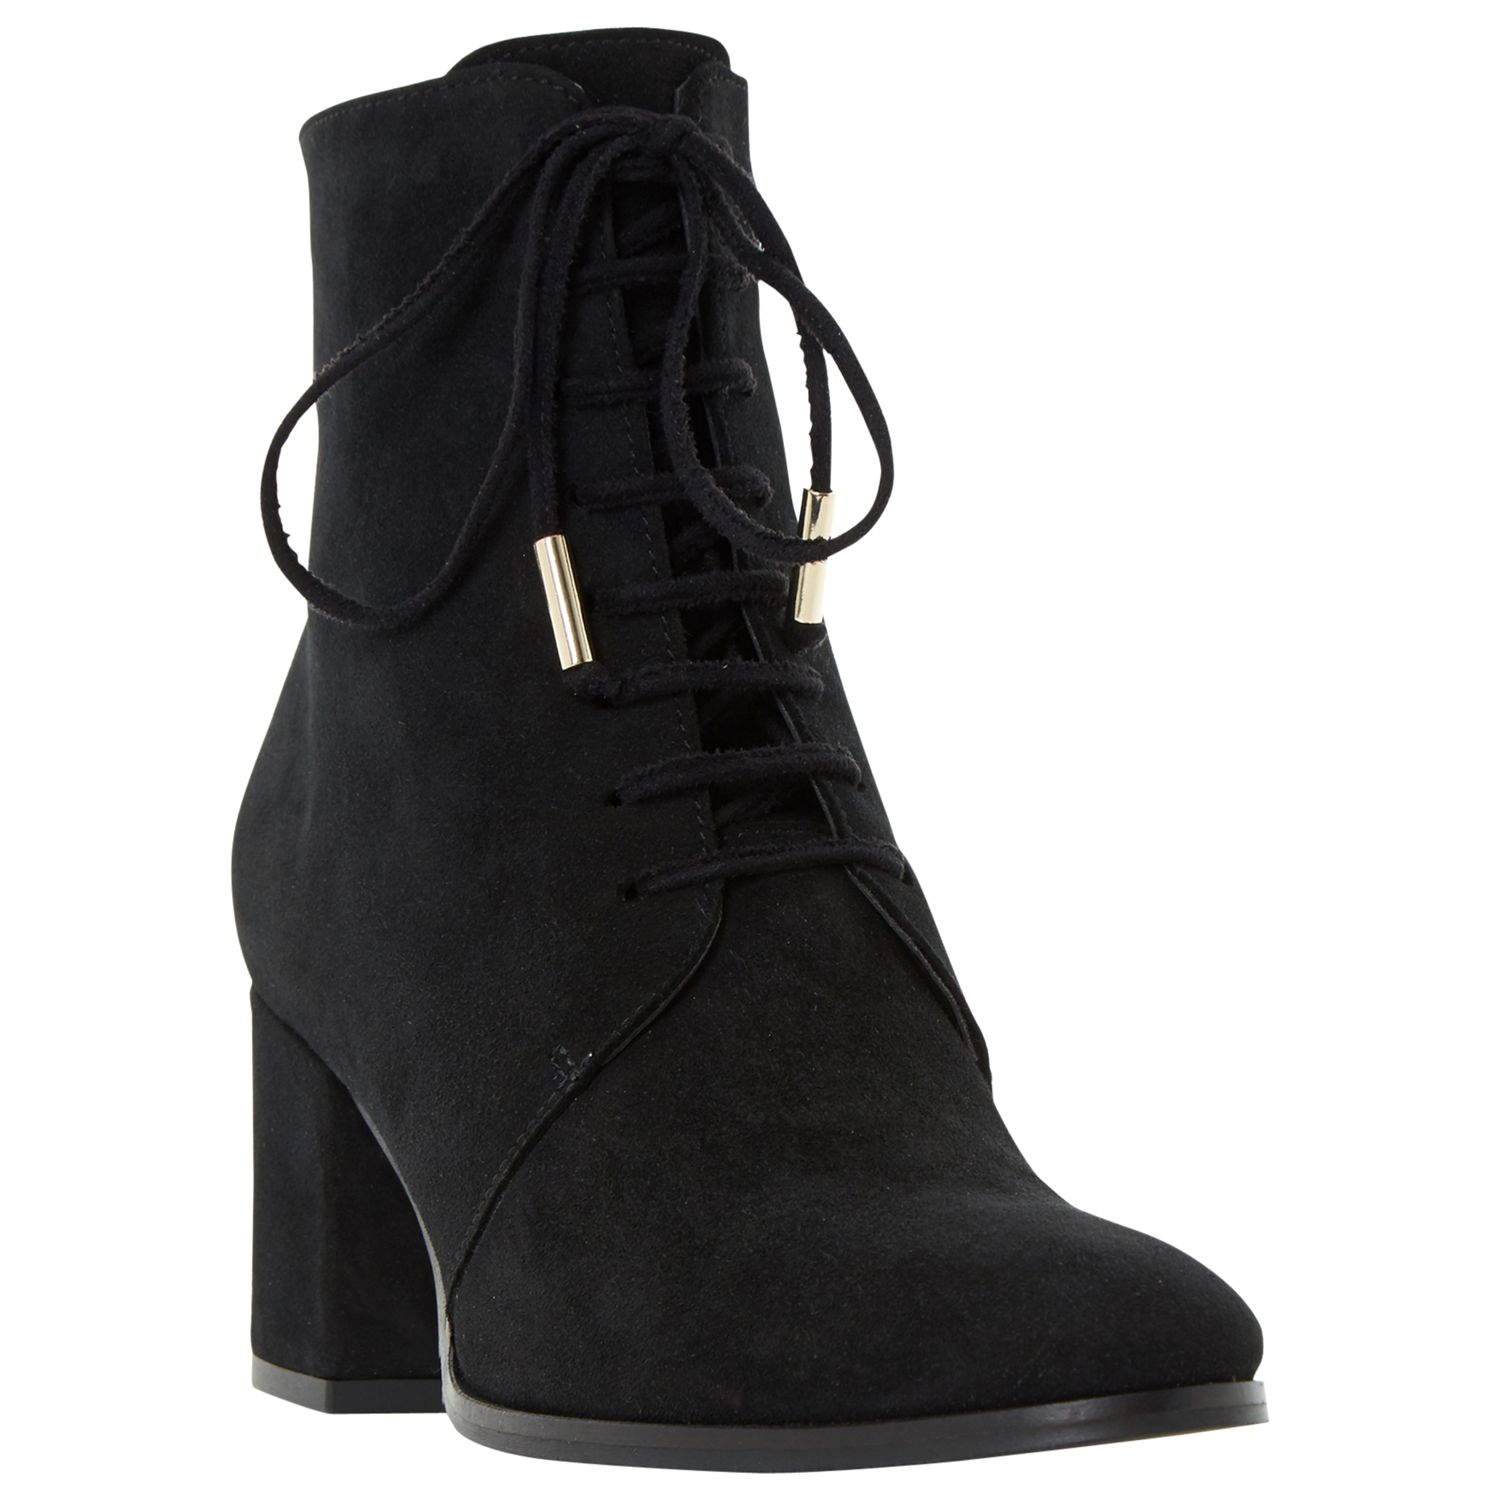 Dune Olita Lace Up Ankle Boots, Black, 4